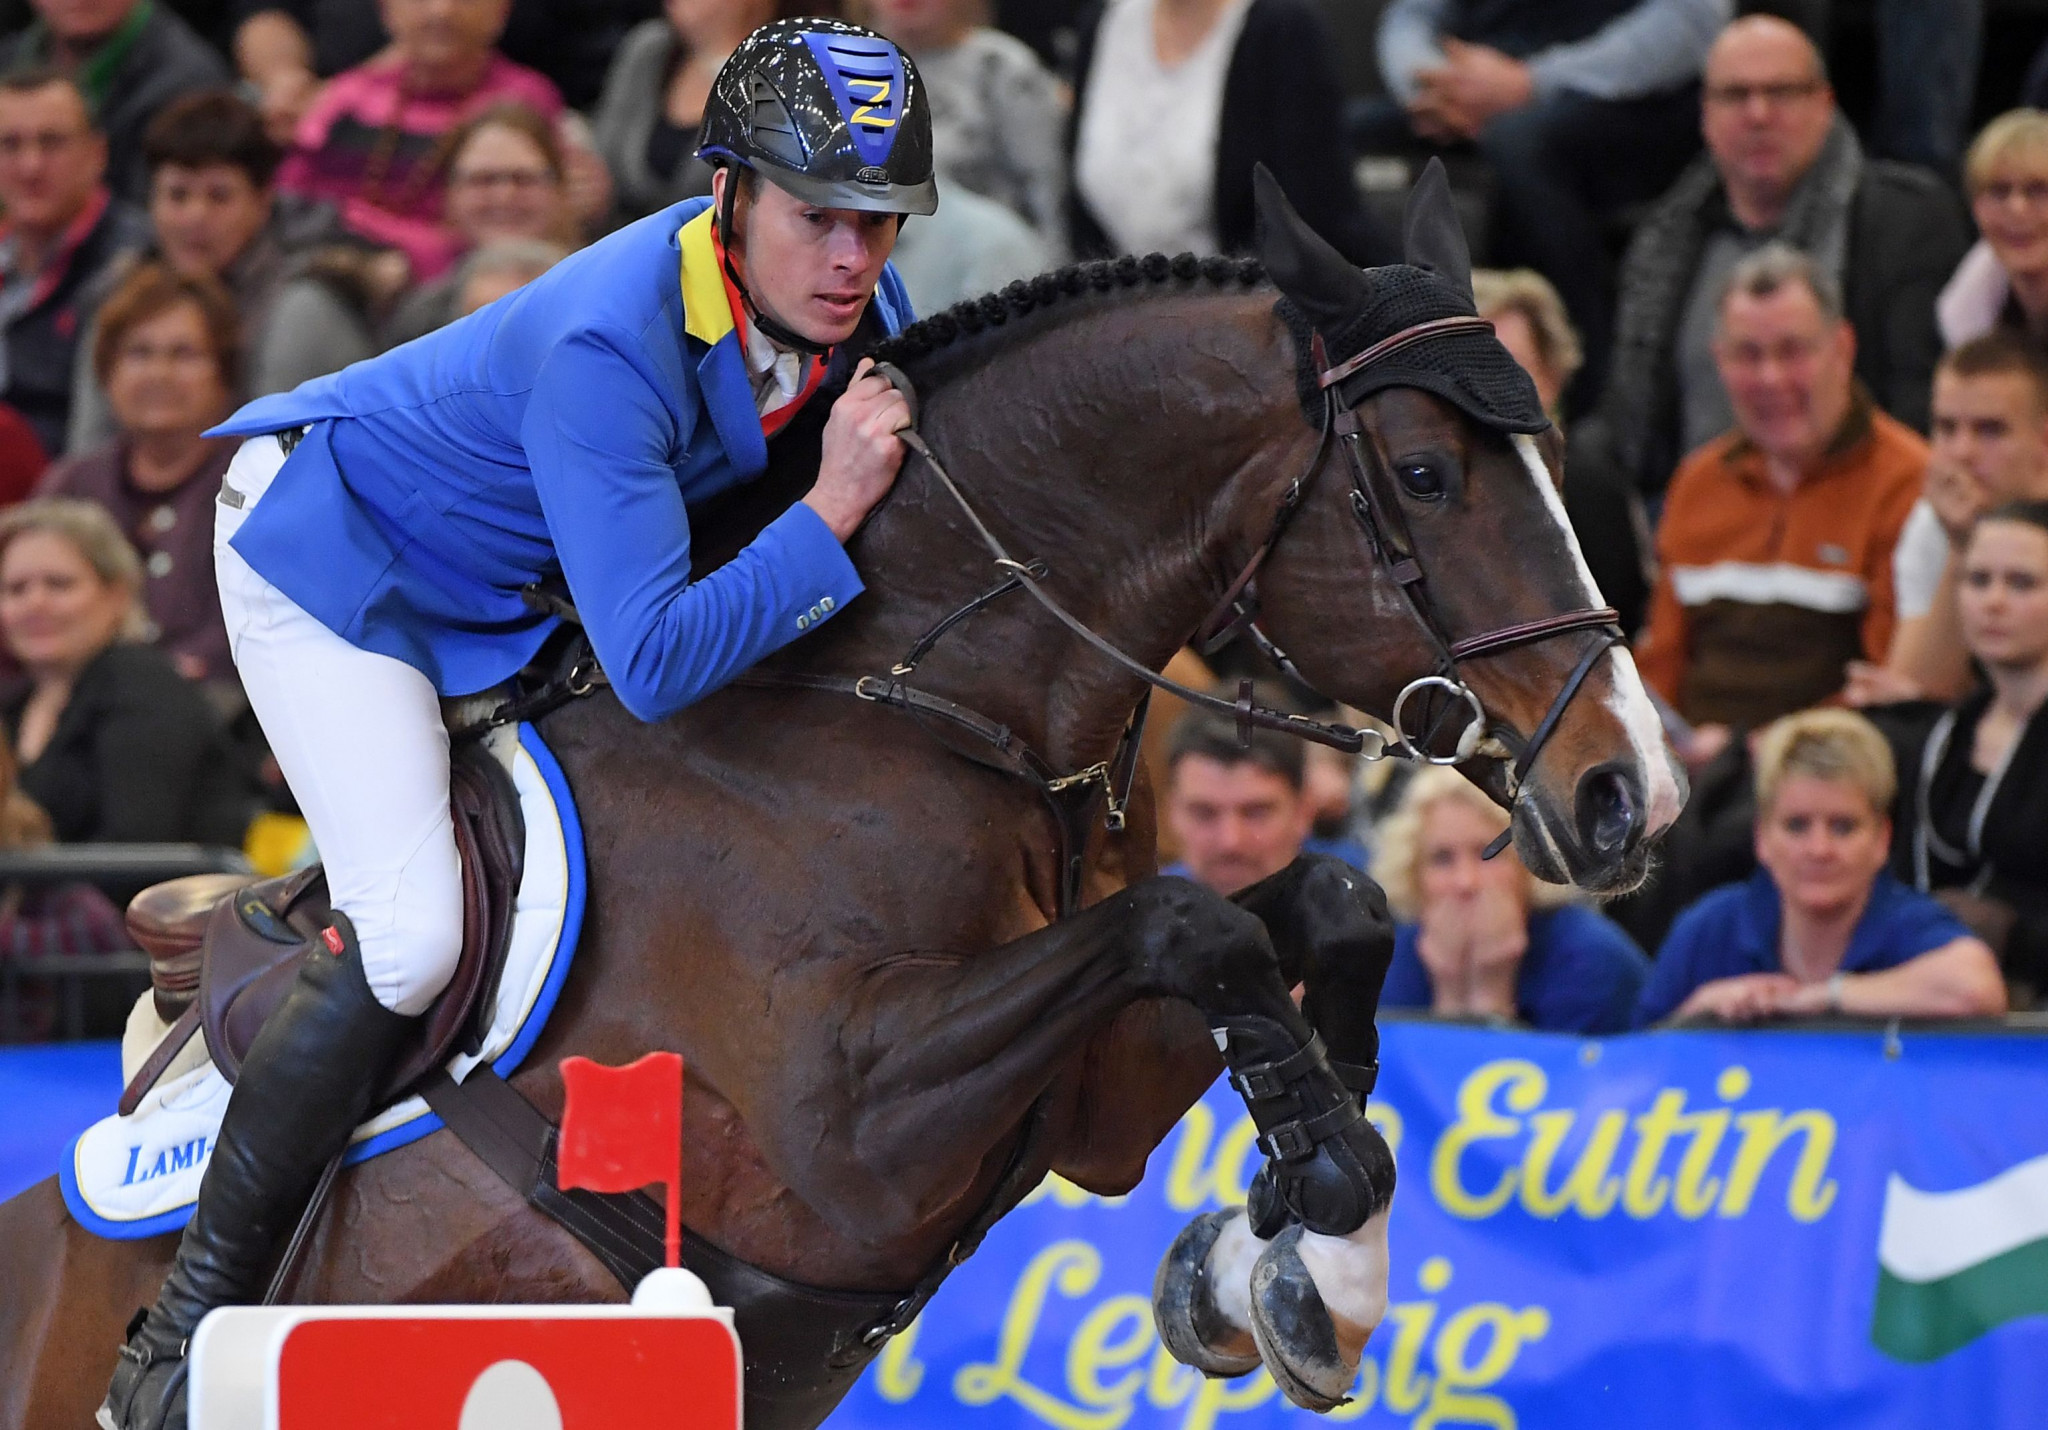 Near-perfect run propels Ahlmann to victory at FEI Jumping World Cup in Leipzig 